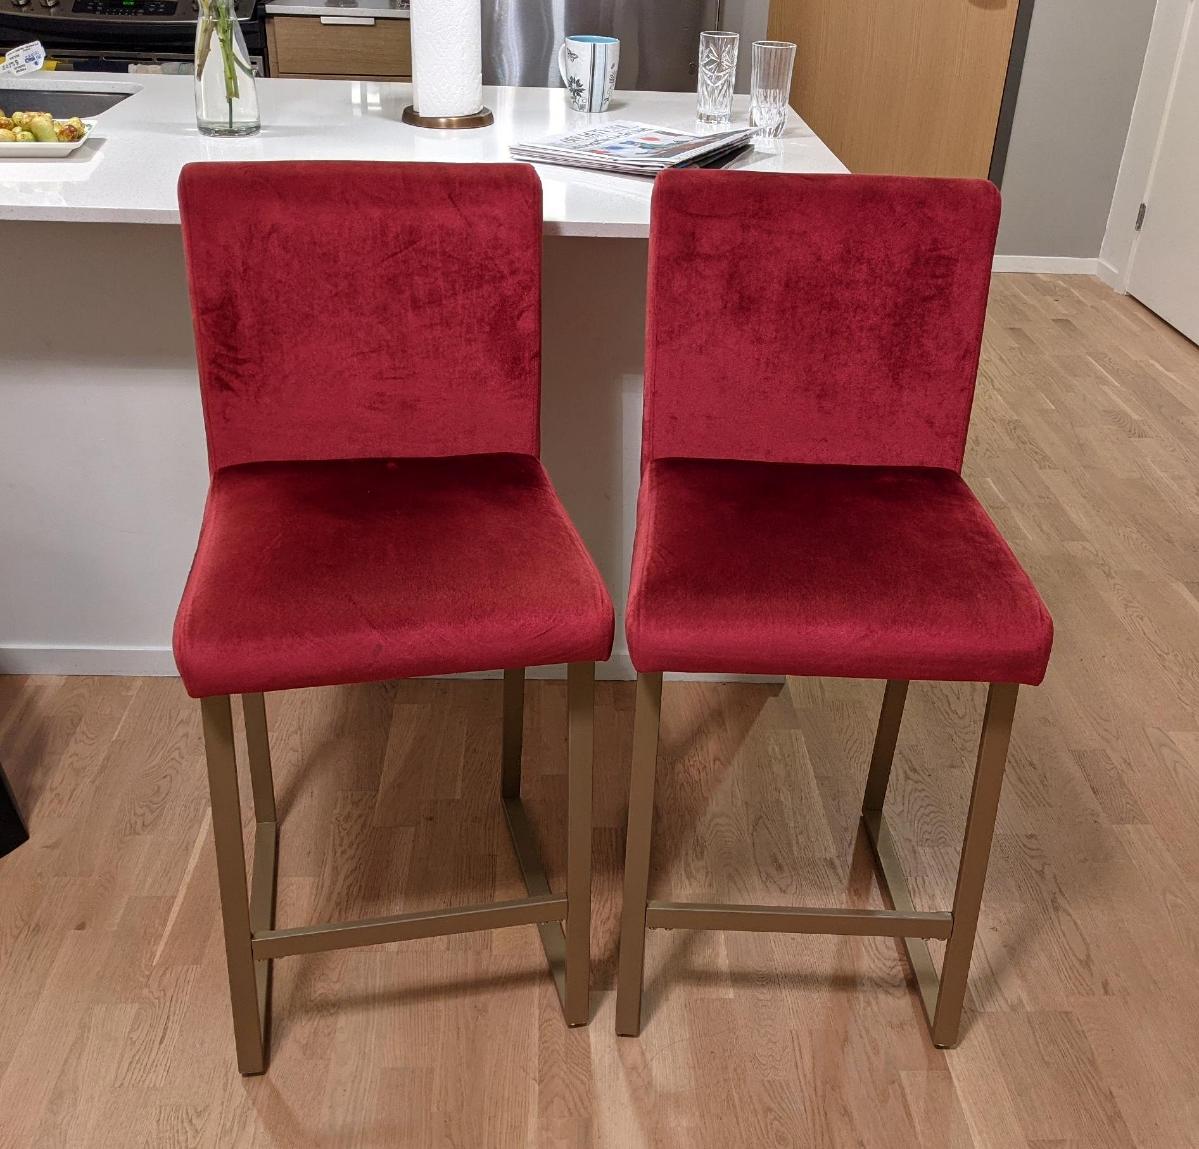 2 red tall chairs for kitchen / bar stools